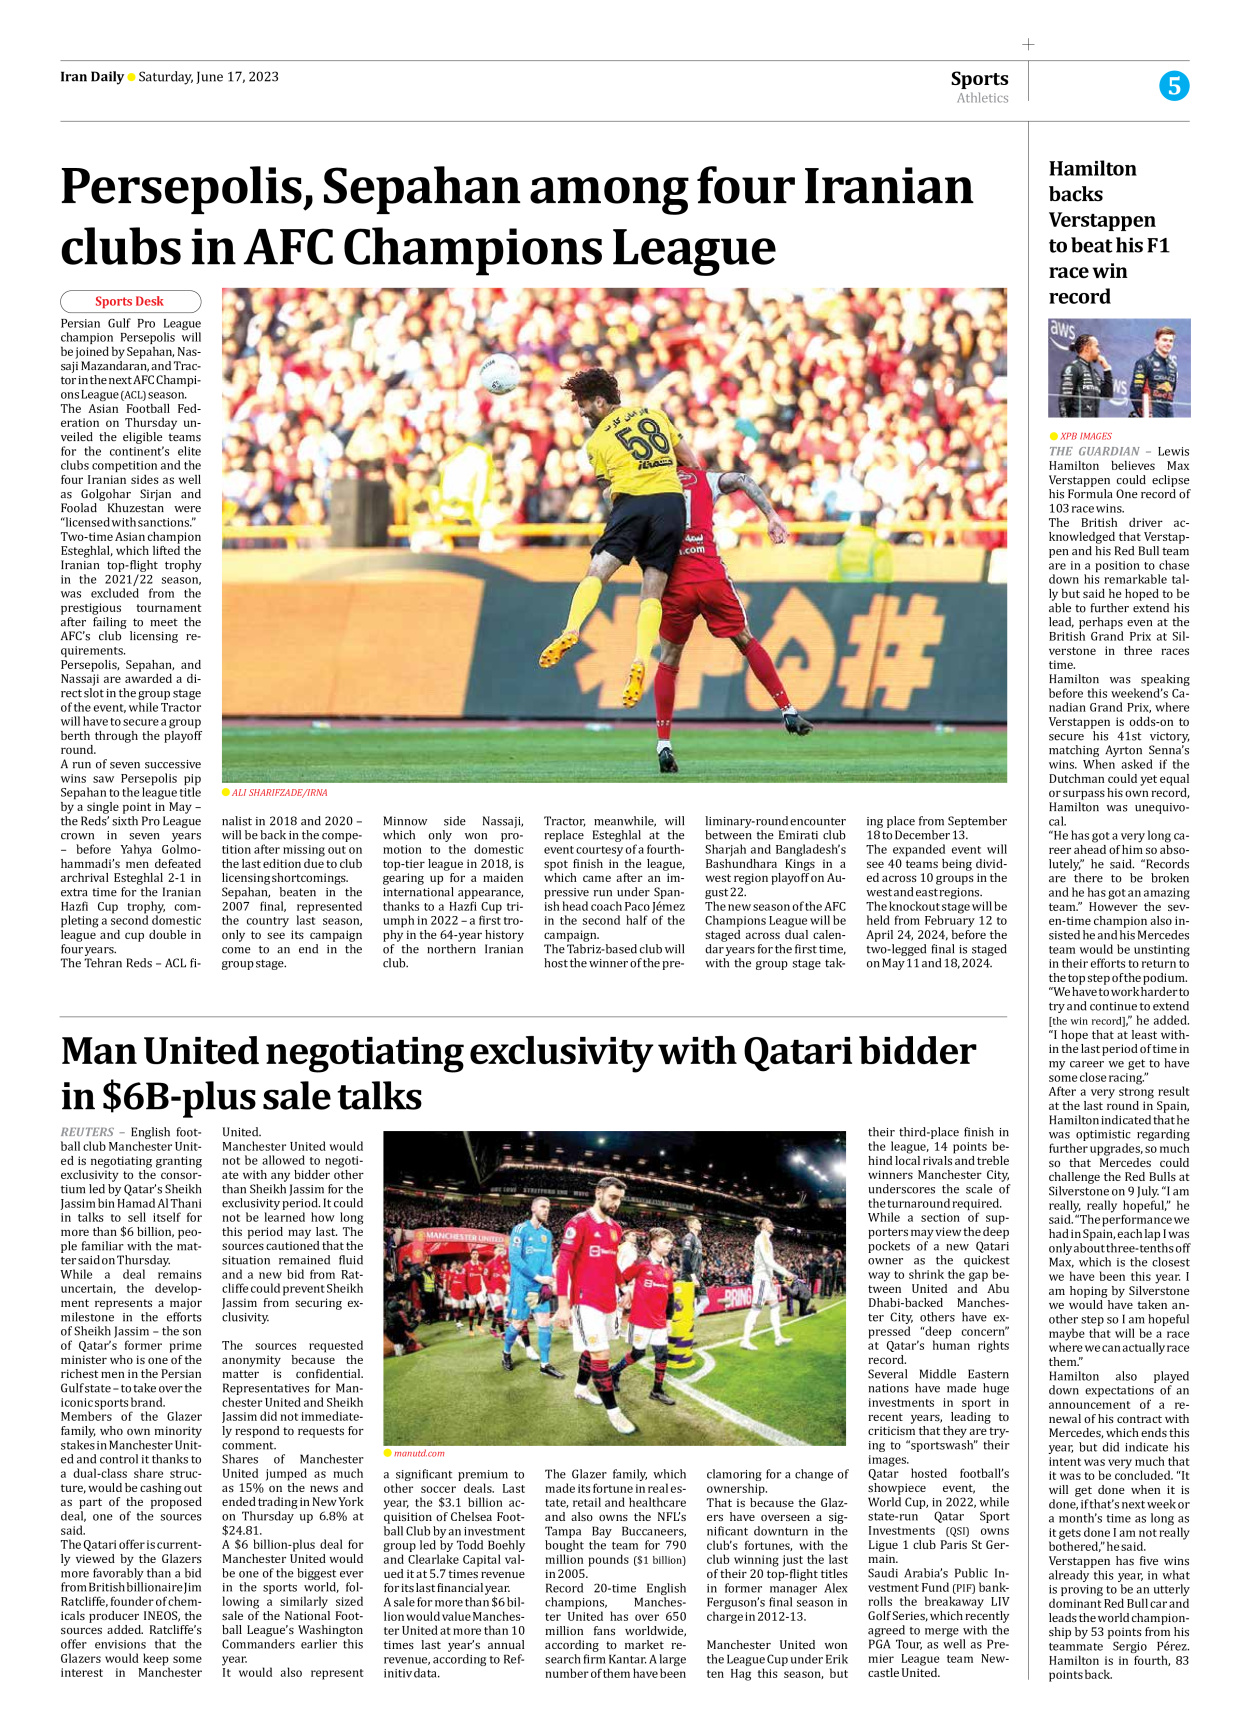 Iran Daily - Number Seven Thousand Three Hundred and Sixteen - 17 June 2023 - Page 5